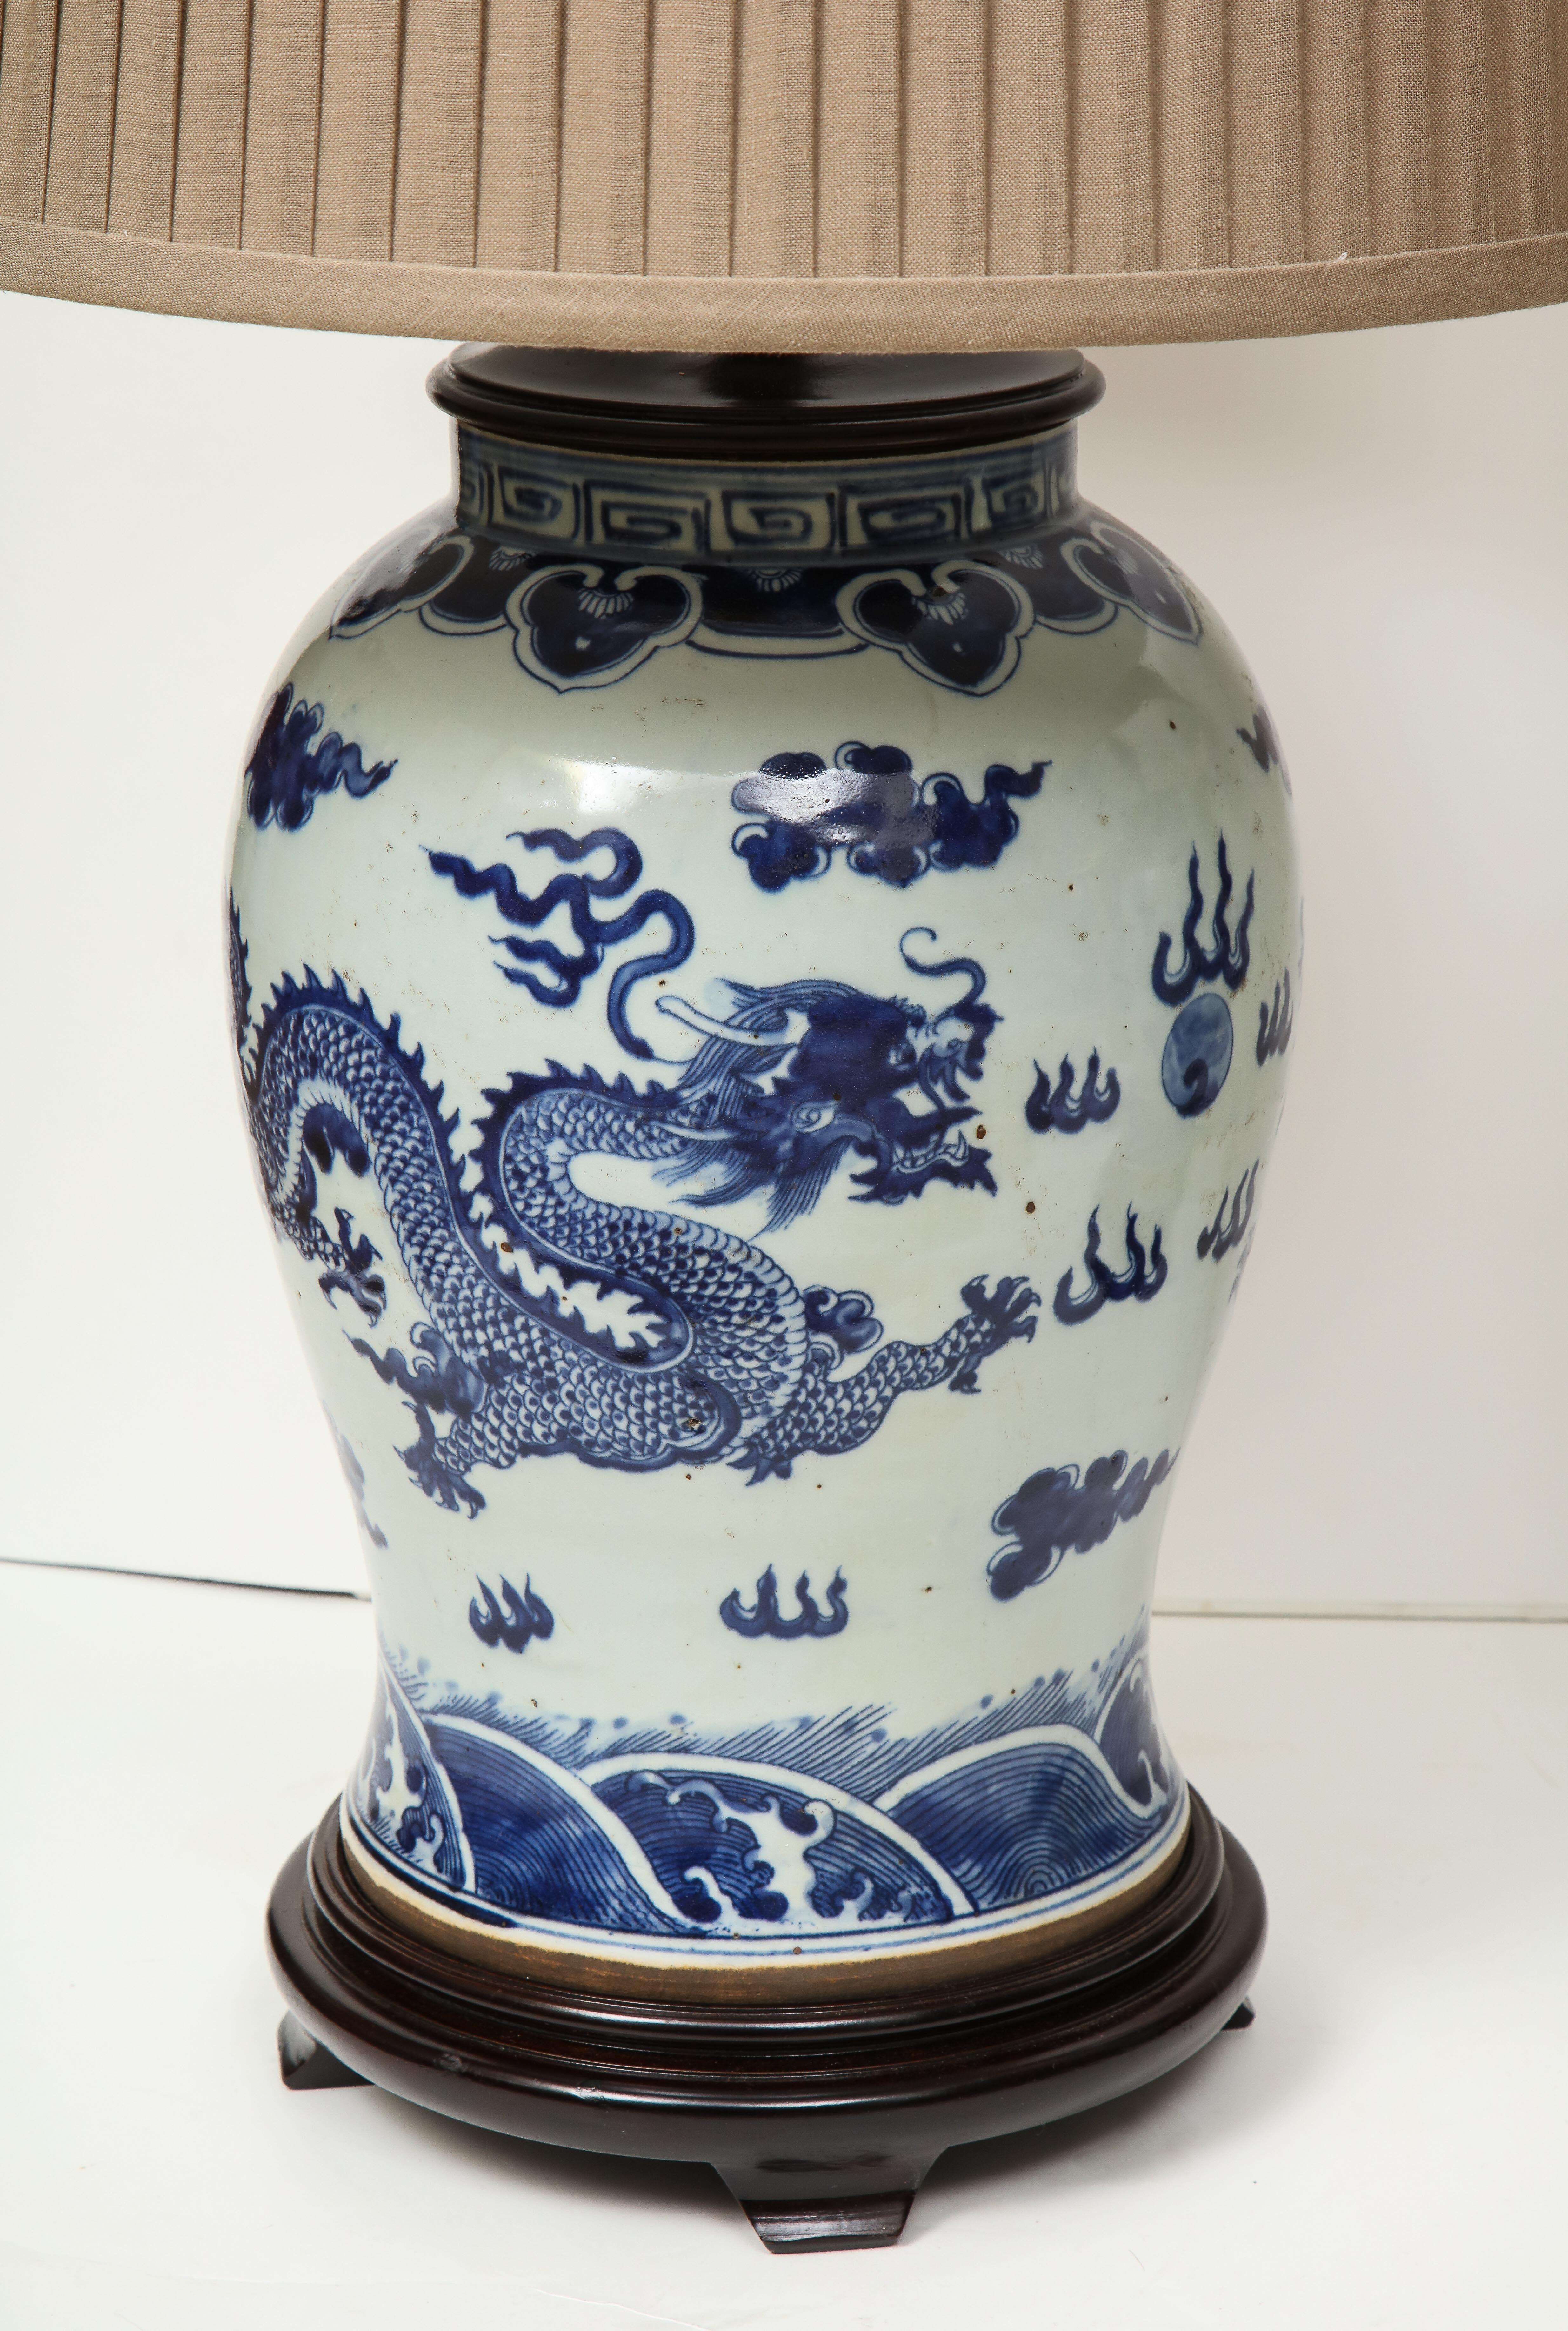 Blue and white will never go out of style. This nice looking pair of Chinese export porcelain jars have been made into lamps on a wood base with taupe pleated shades. A great way to add color and personality to a space, these would look great on